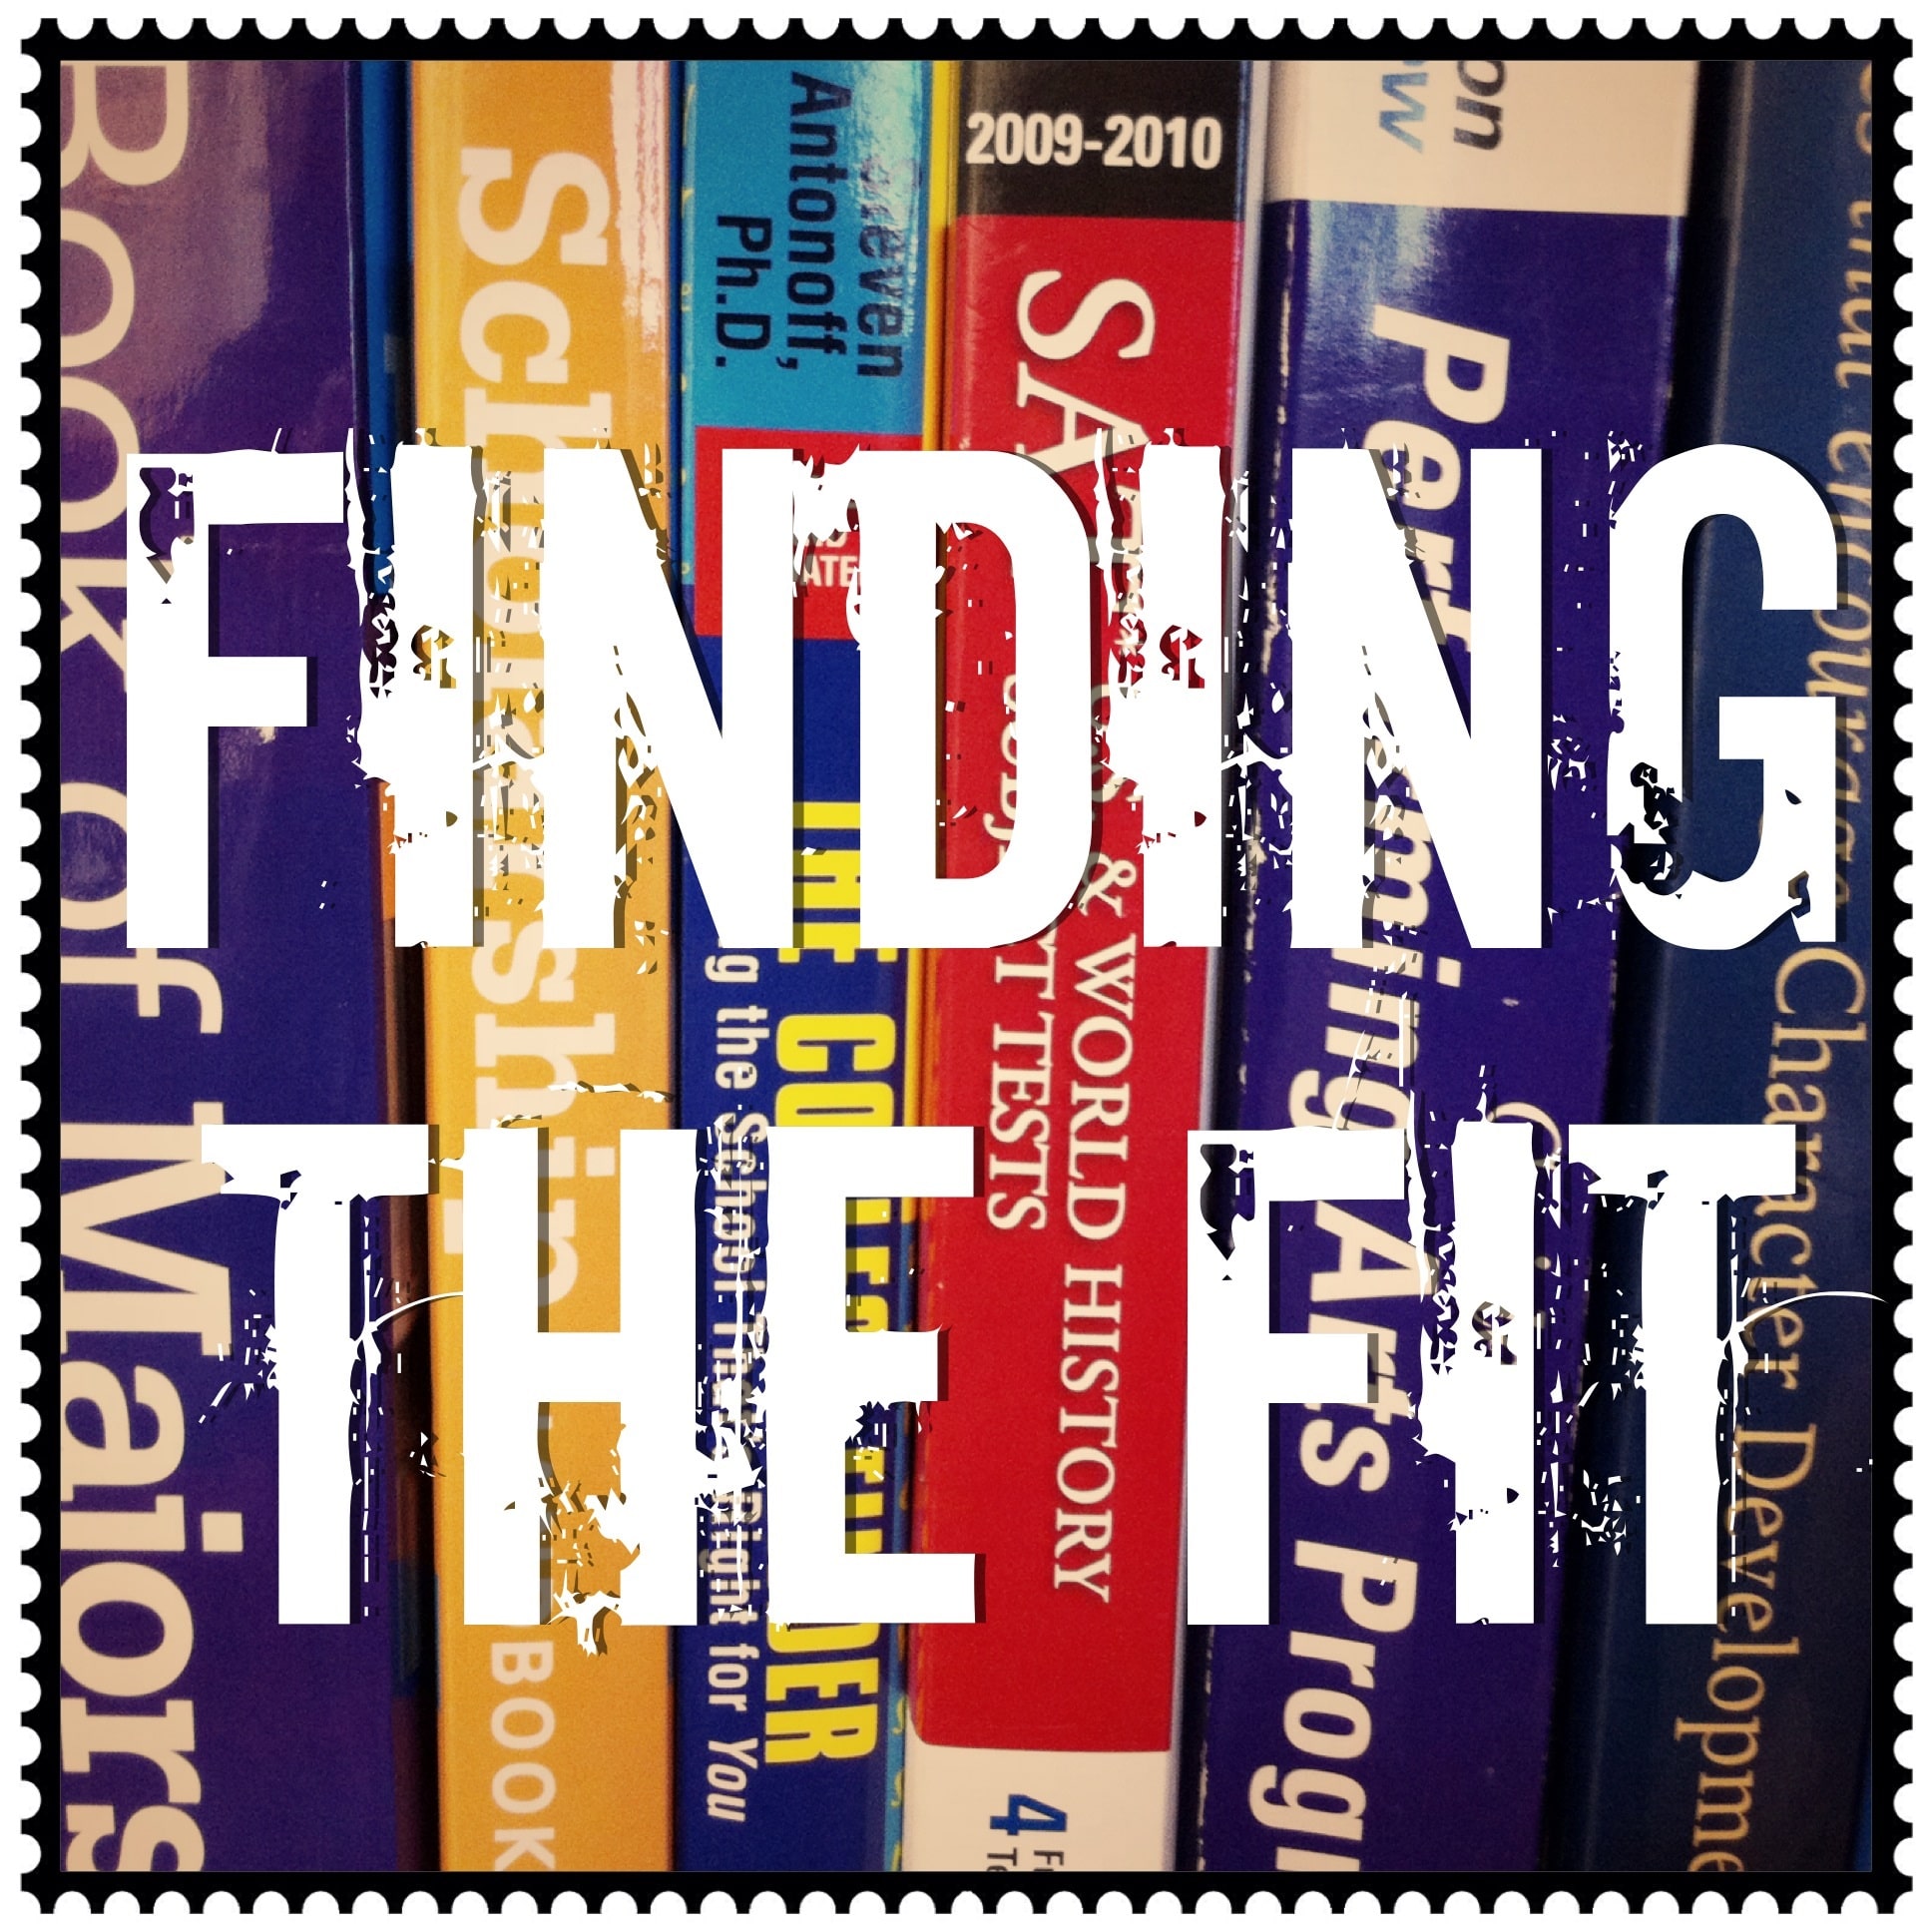 Finding the Fit: Lizzie Bennett